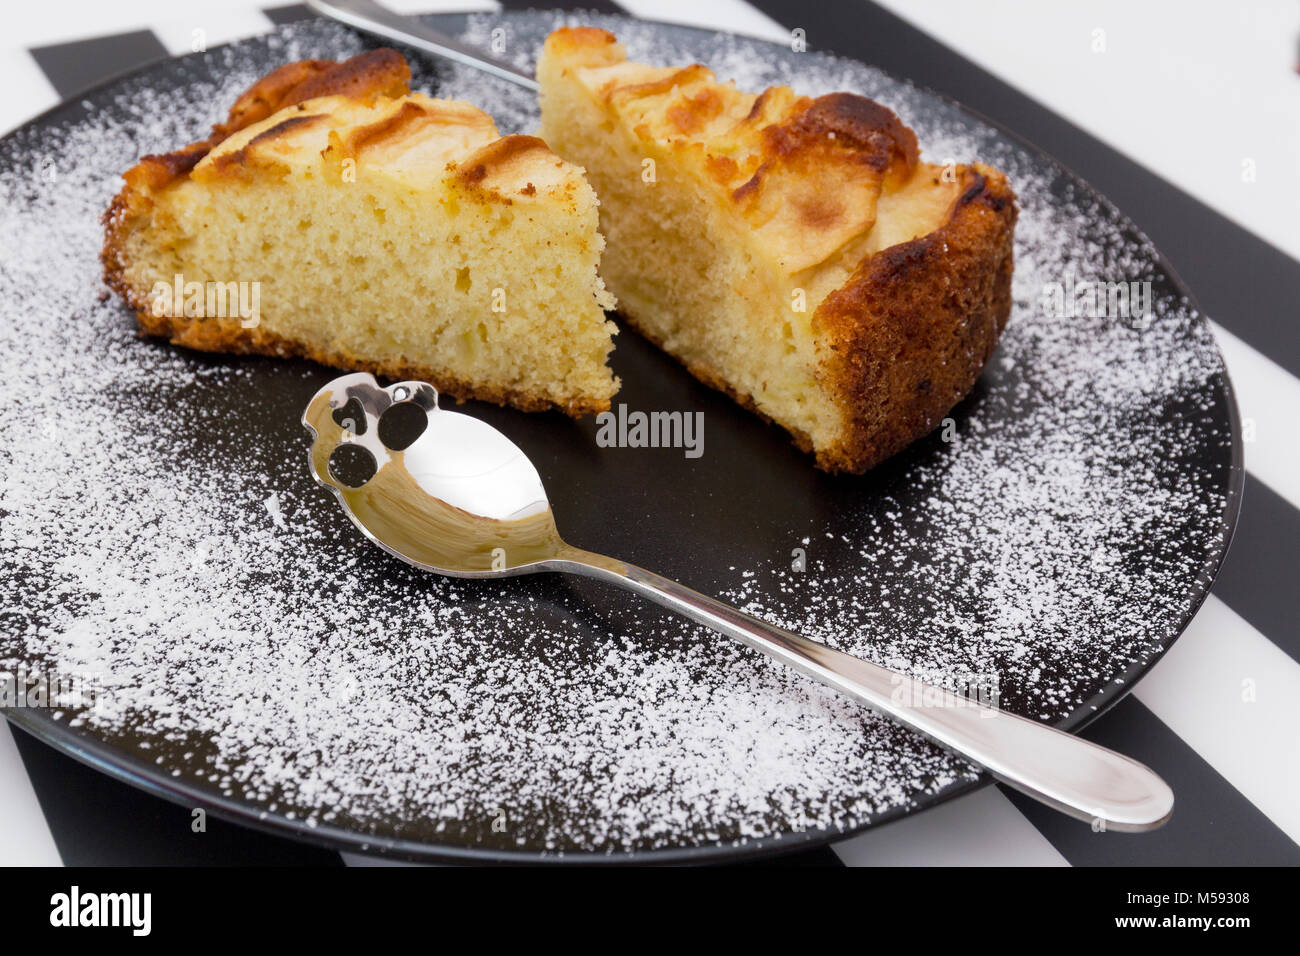 A delicious apple pie ready to be eaten with a spoon shaped skull. Stock Photo